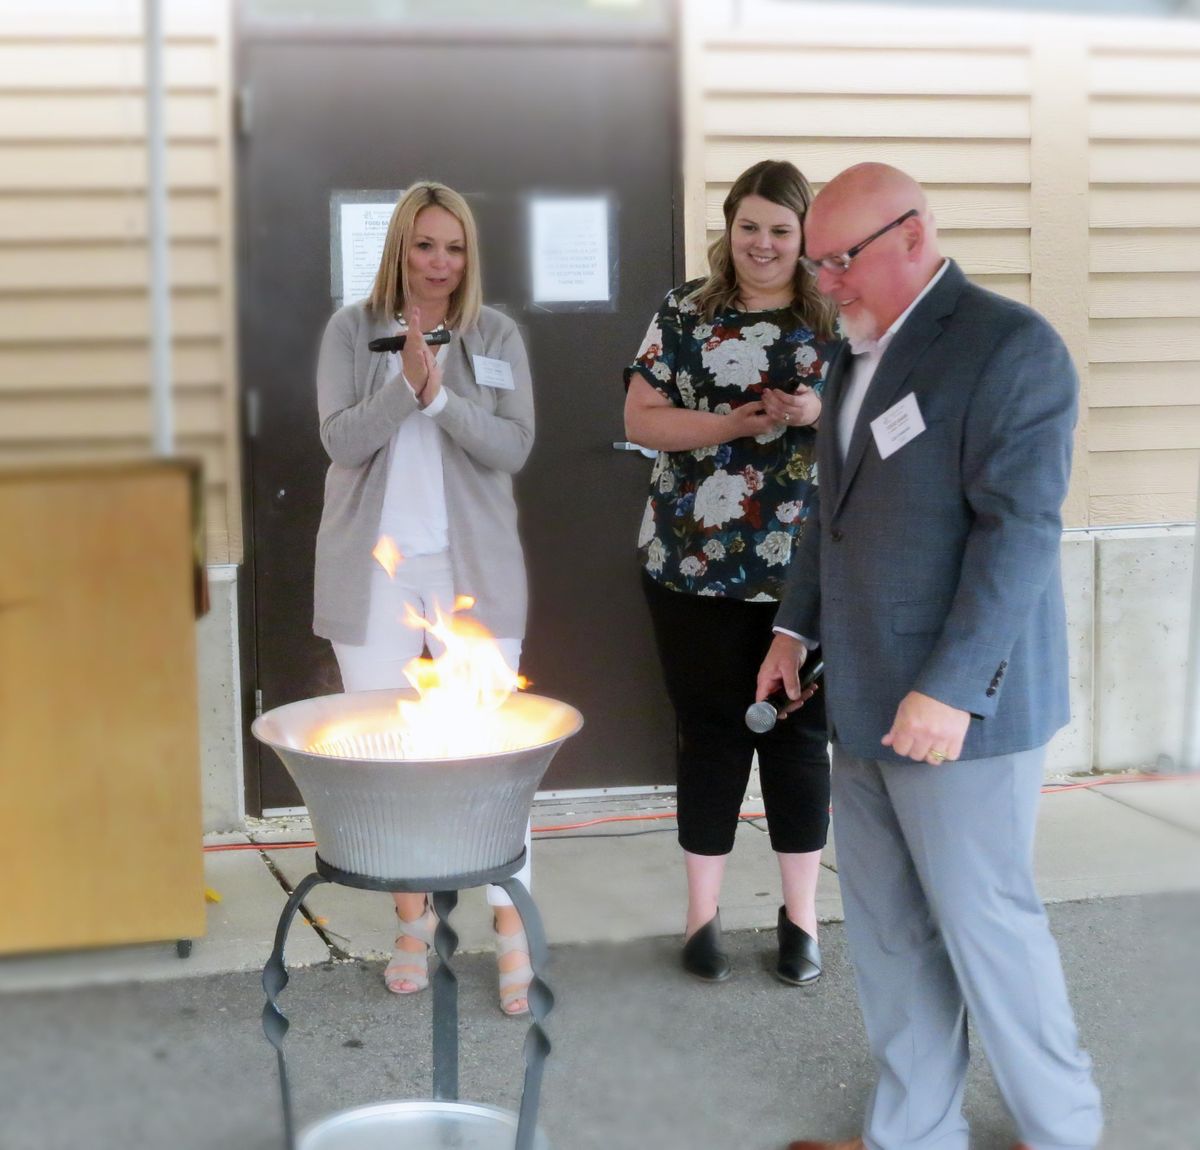 Lindsey Myhre of STCU, Cal Coblentz of Spokane Valley Partners CEO and Lindsey Funderburke of STCU hold a burning ceremony to celebrate the Partners paying off its mortgage contract. (Courtesy of Cal Coblentz)